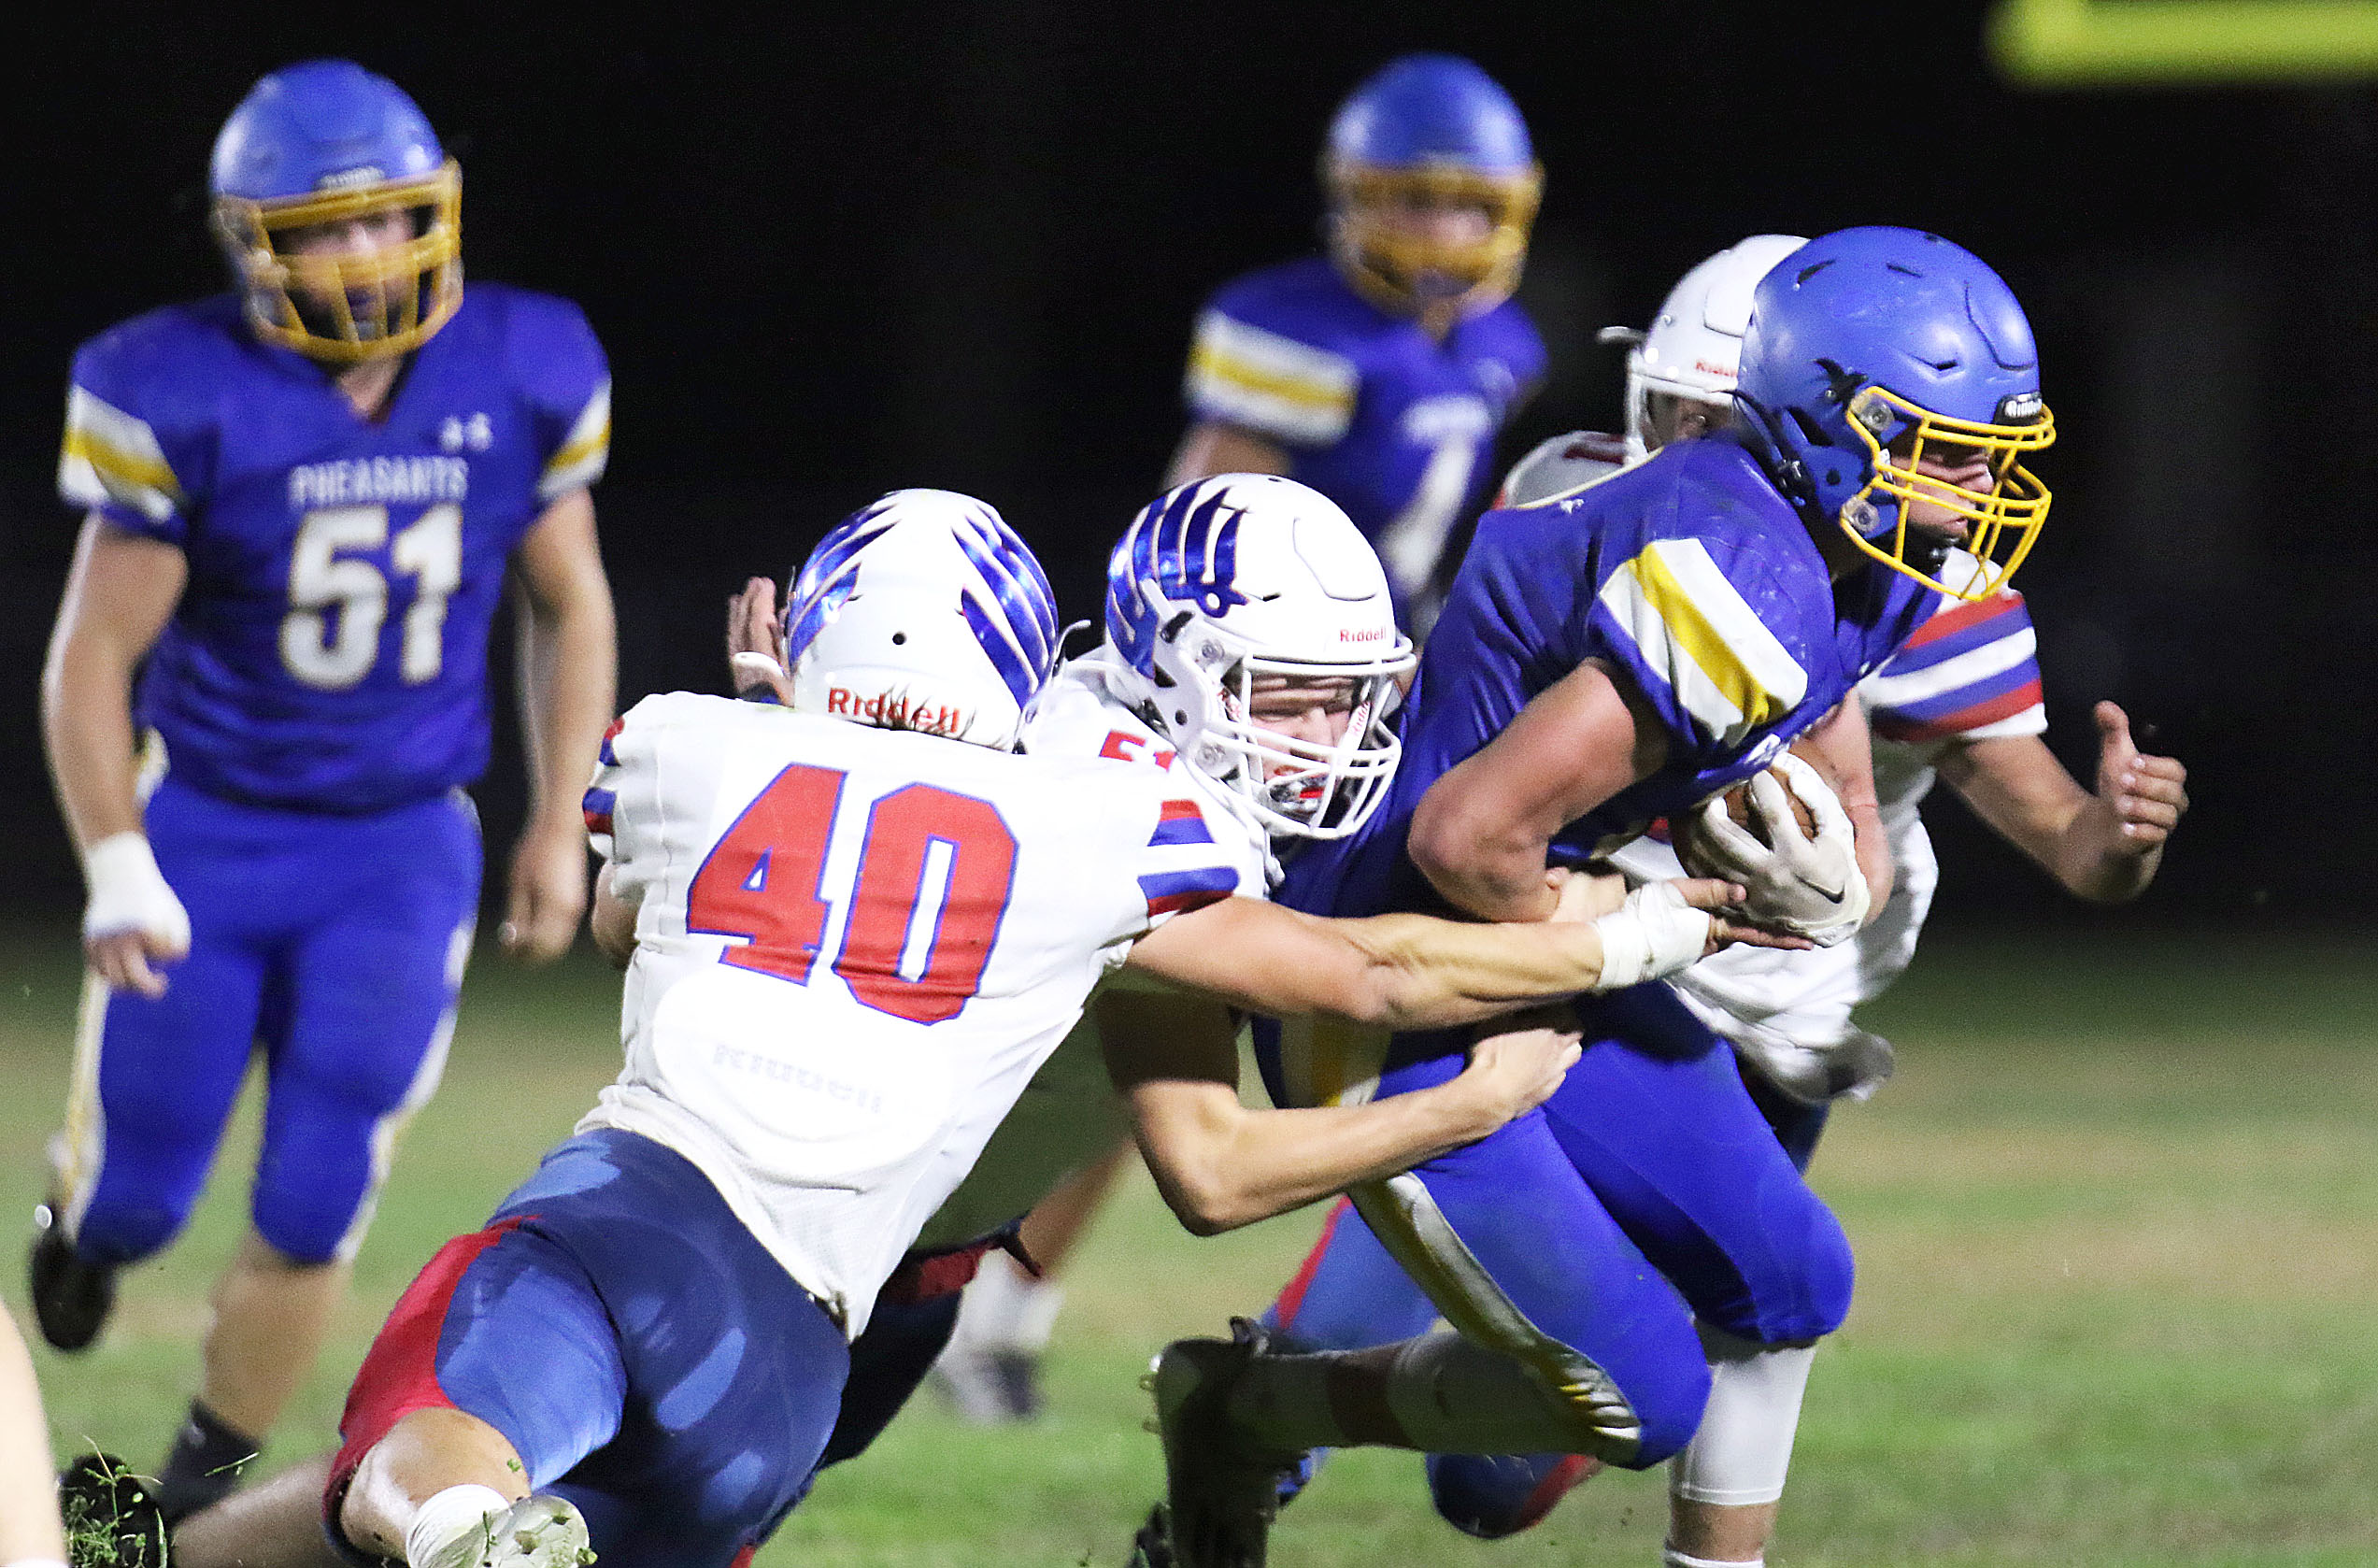 9/30/22 PHOTO GALLERY: Redfield Homecoming vs. Parker 